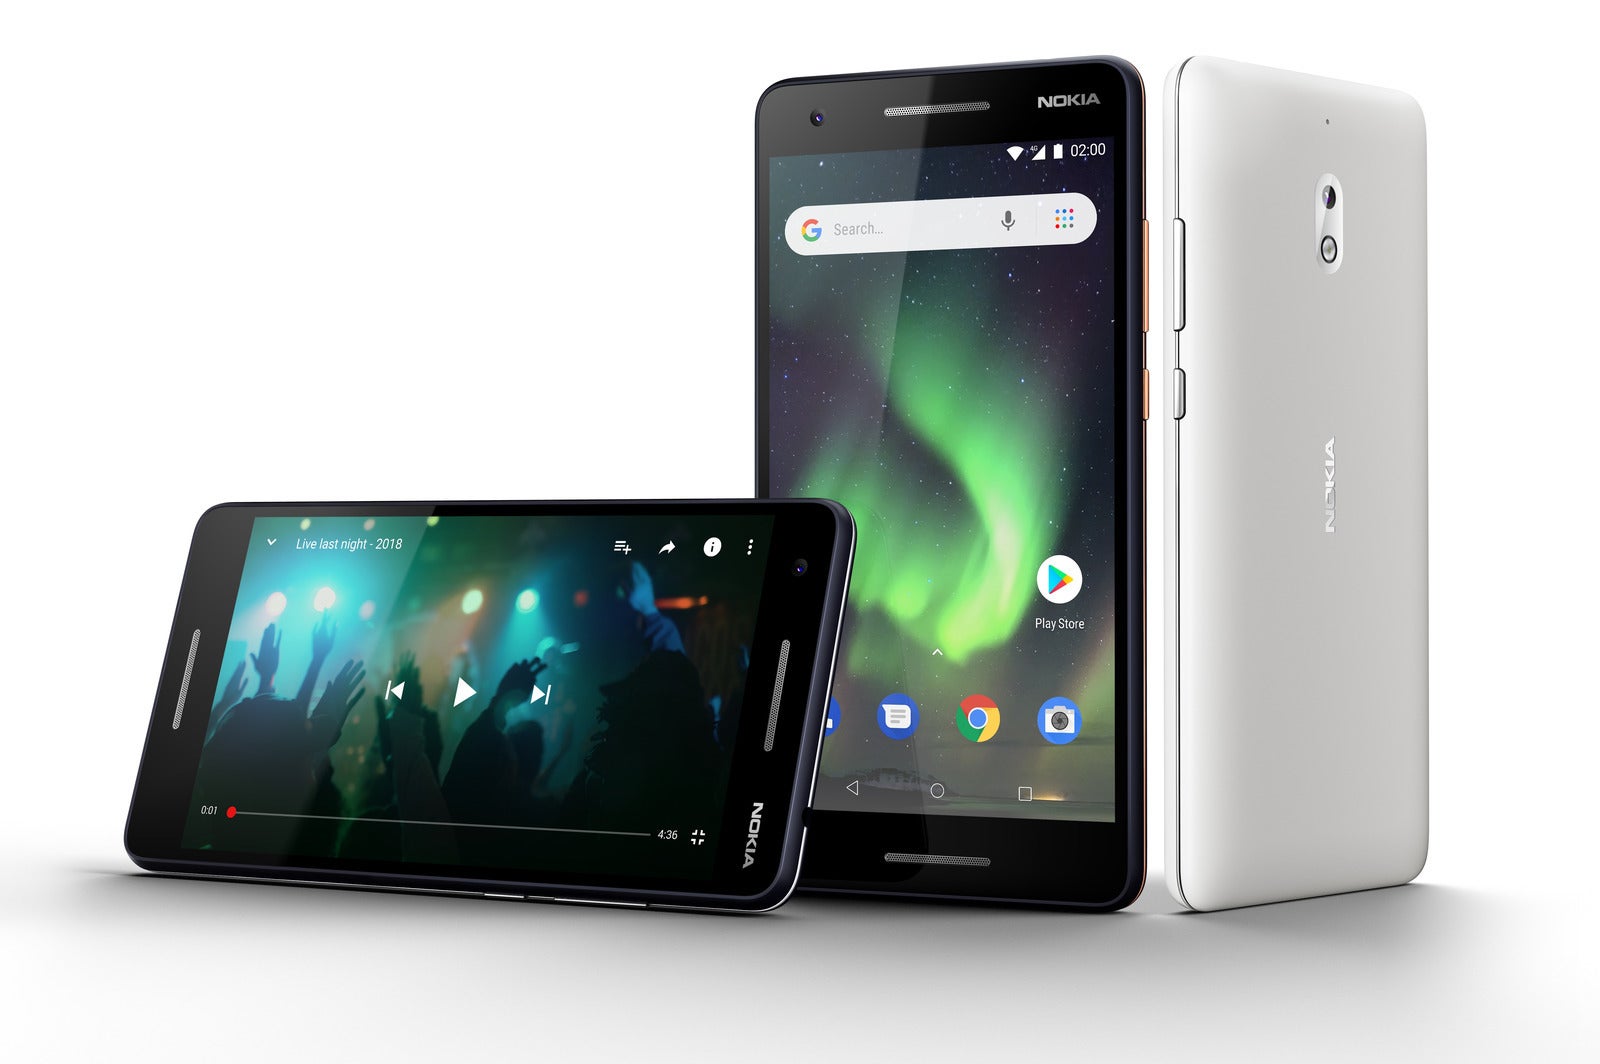 The new Nokia 2.1 has a huge, long-lasting battery - Nokia 5.1, Nokia 3.1, and Nokia 2.1 are announced: the purest of Android at an affordable price